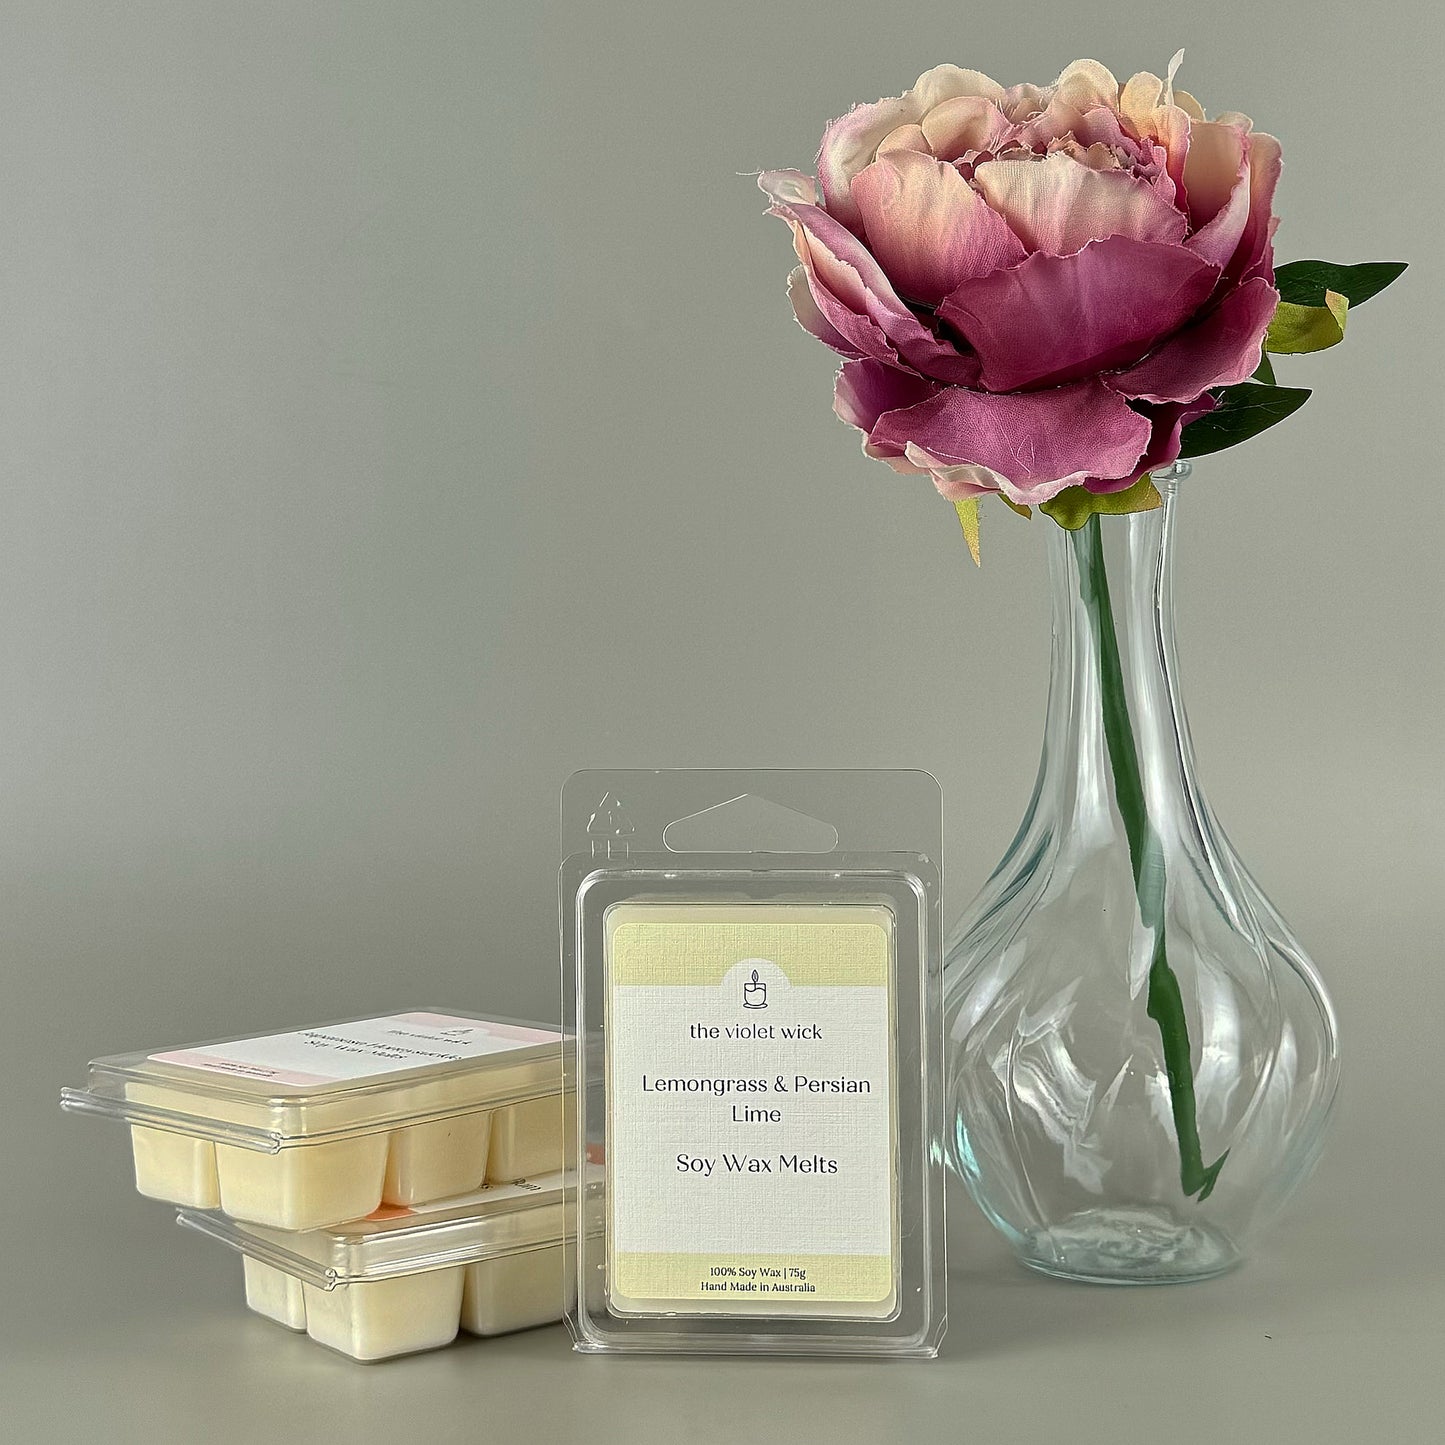 Soy Wax Melt Bundle from The Violet Wick